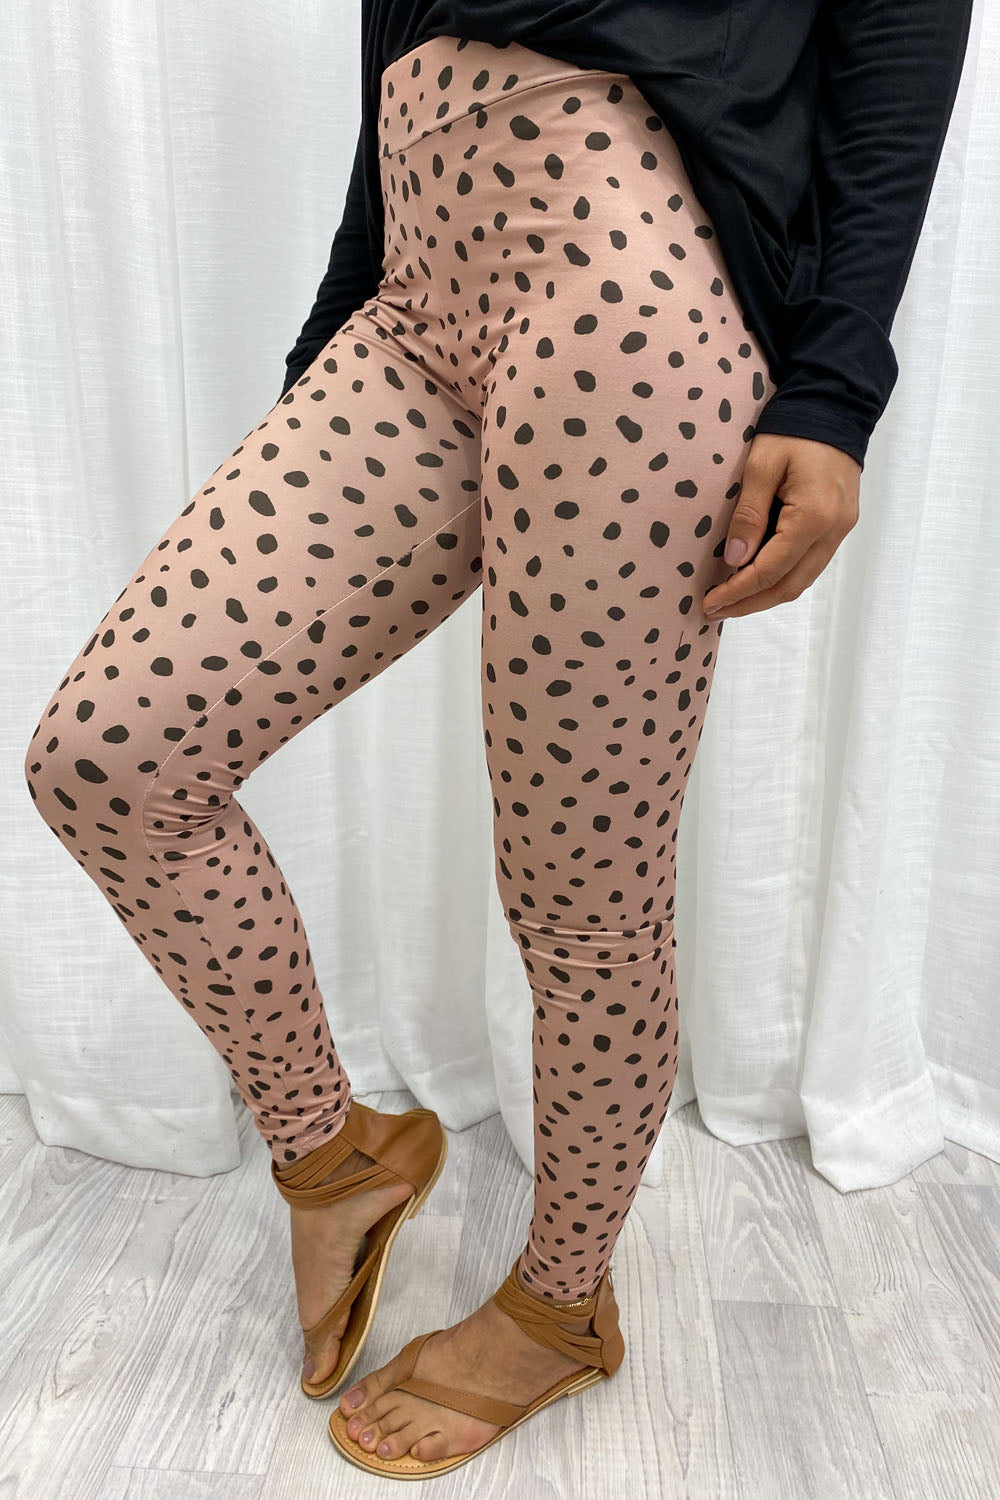 The Best Tights Ever